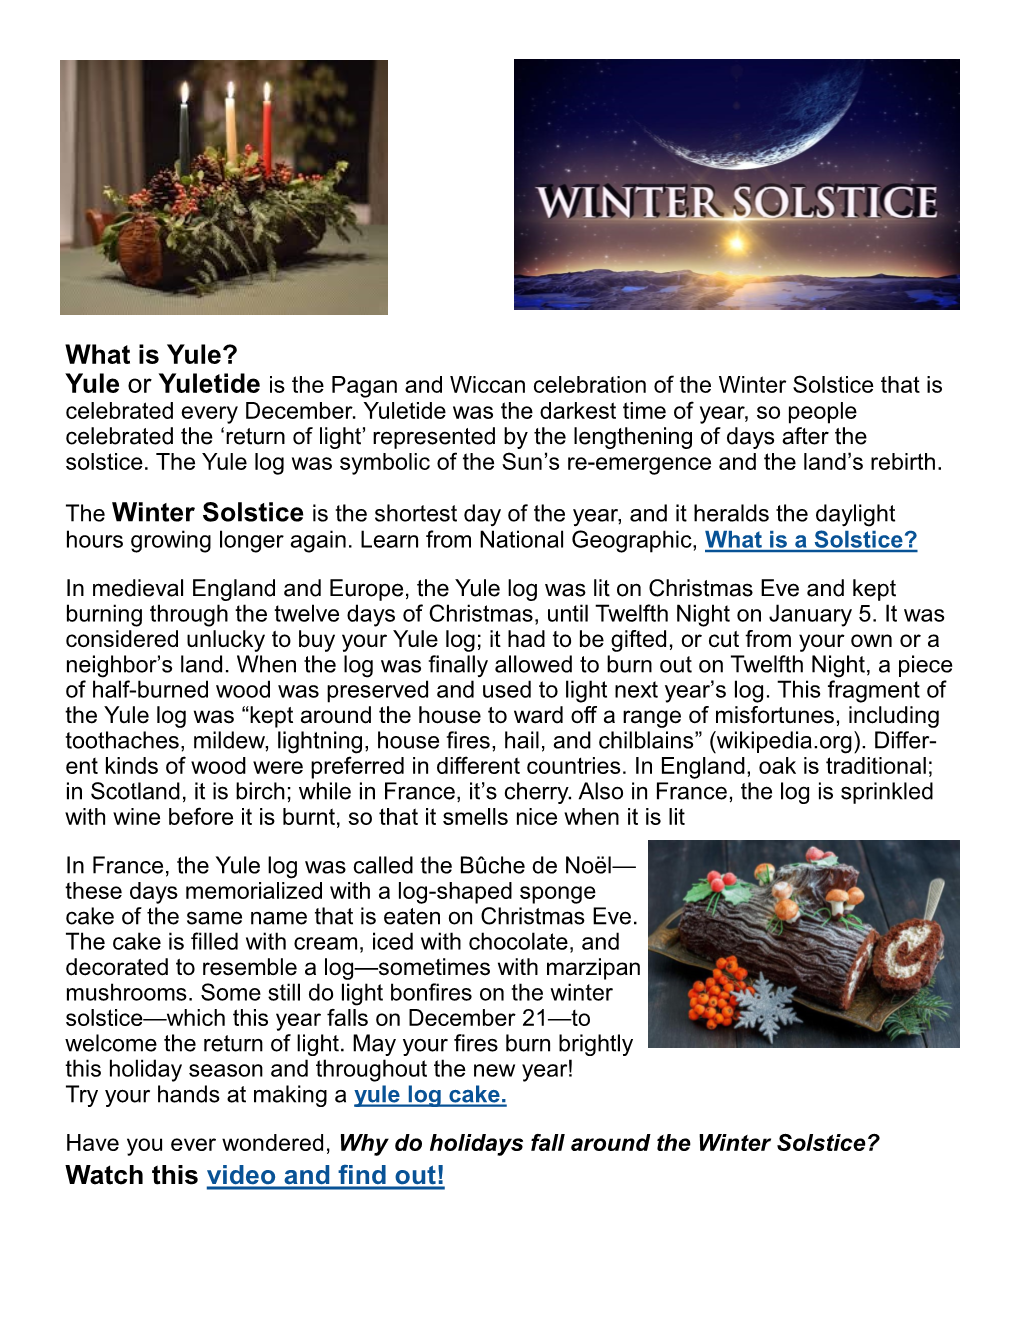 Winter Solstice That Is Celebrated Every December